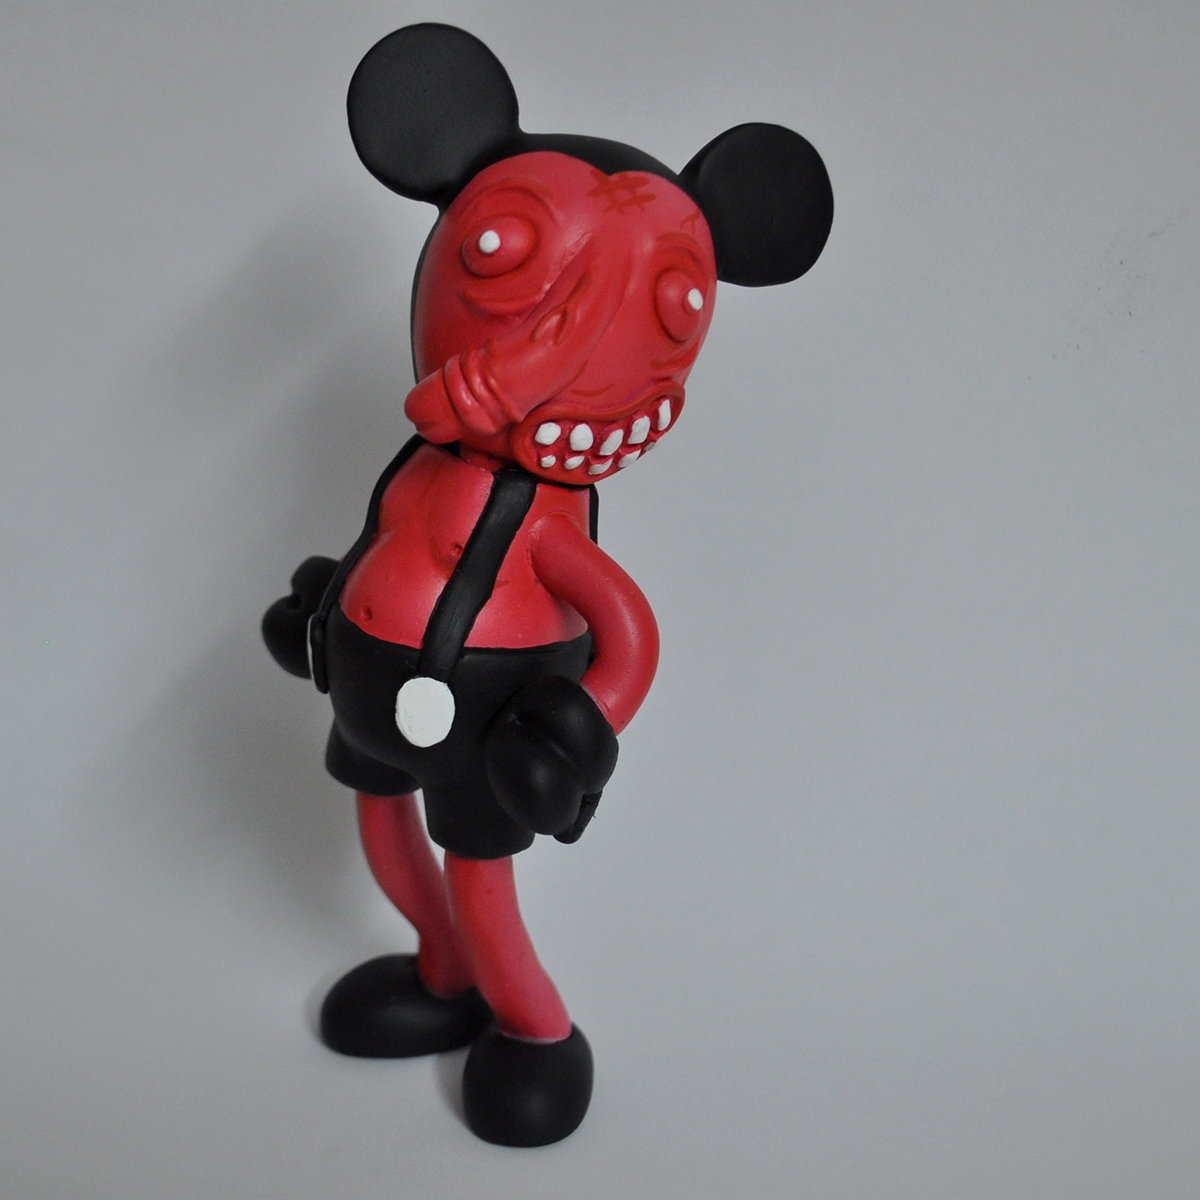 funnymouse patientno6 resinfigure